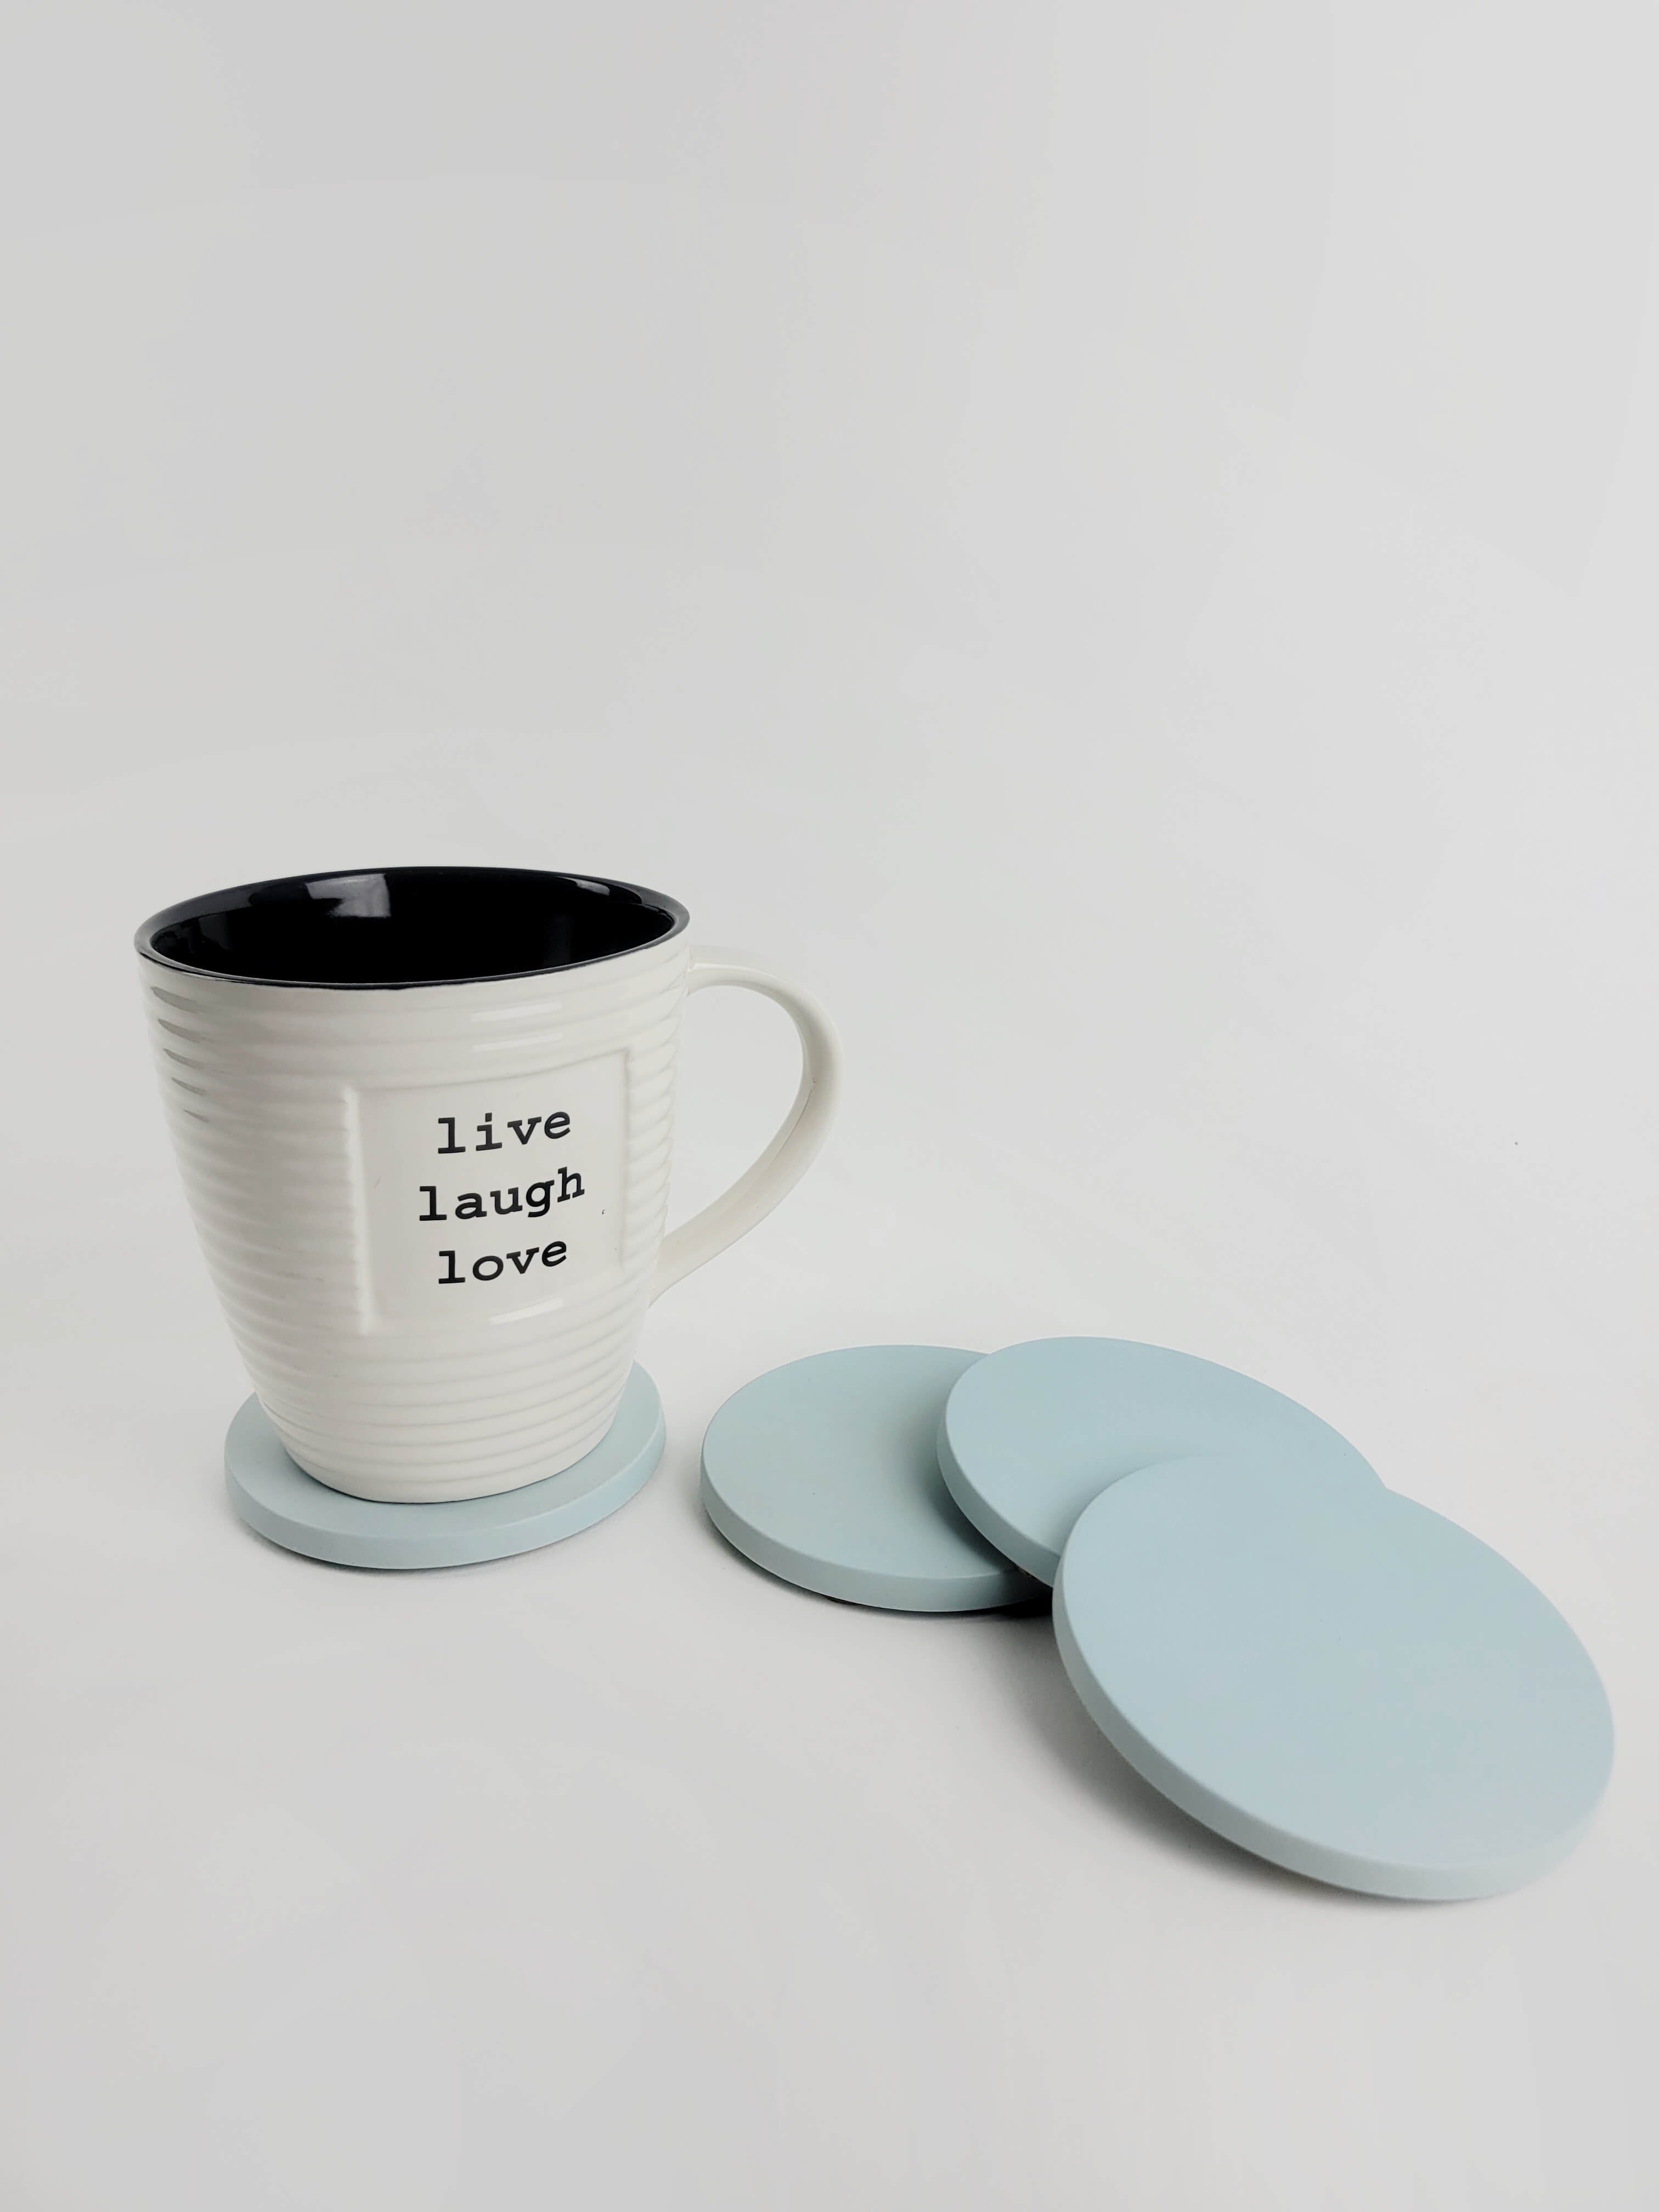 Set of 4 pastel turquoise concrete coasters with a coffee mug resting on one, showcasing elegant home decor.